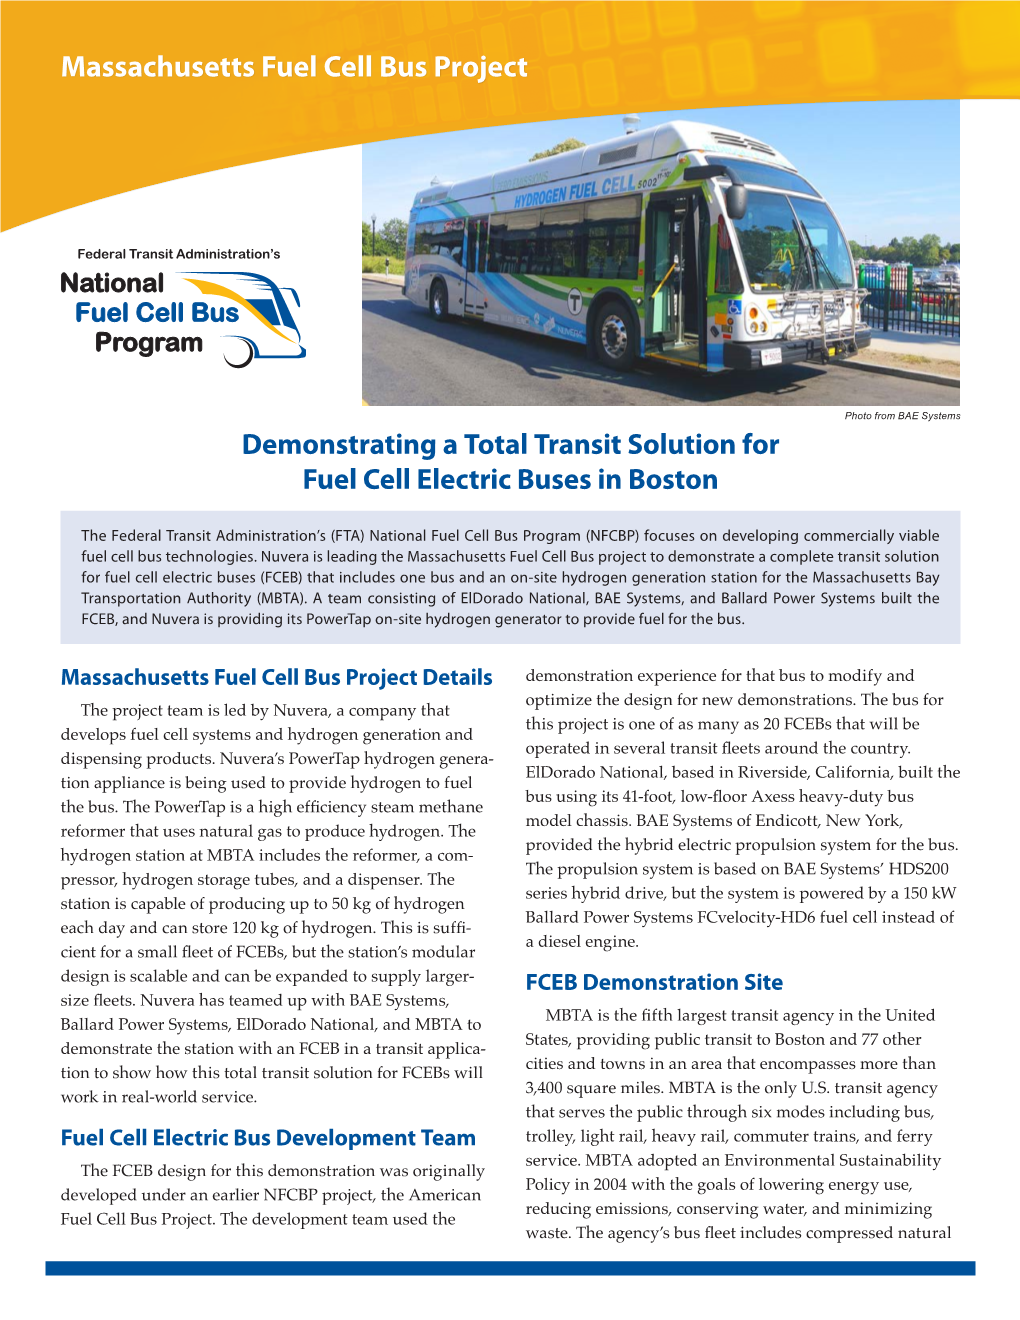 Massachusetts Fuel Cell Bus Project: Demonstrating a Total Transit